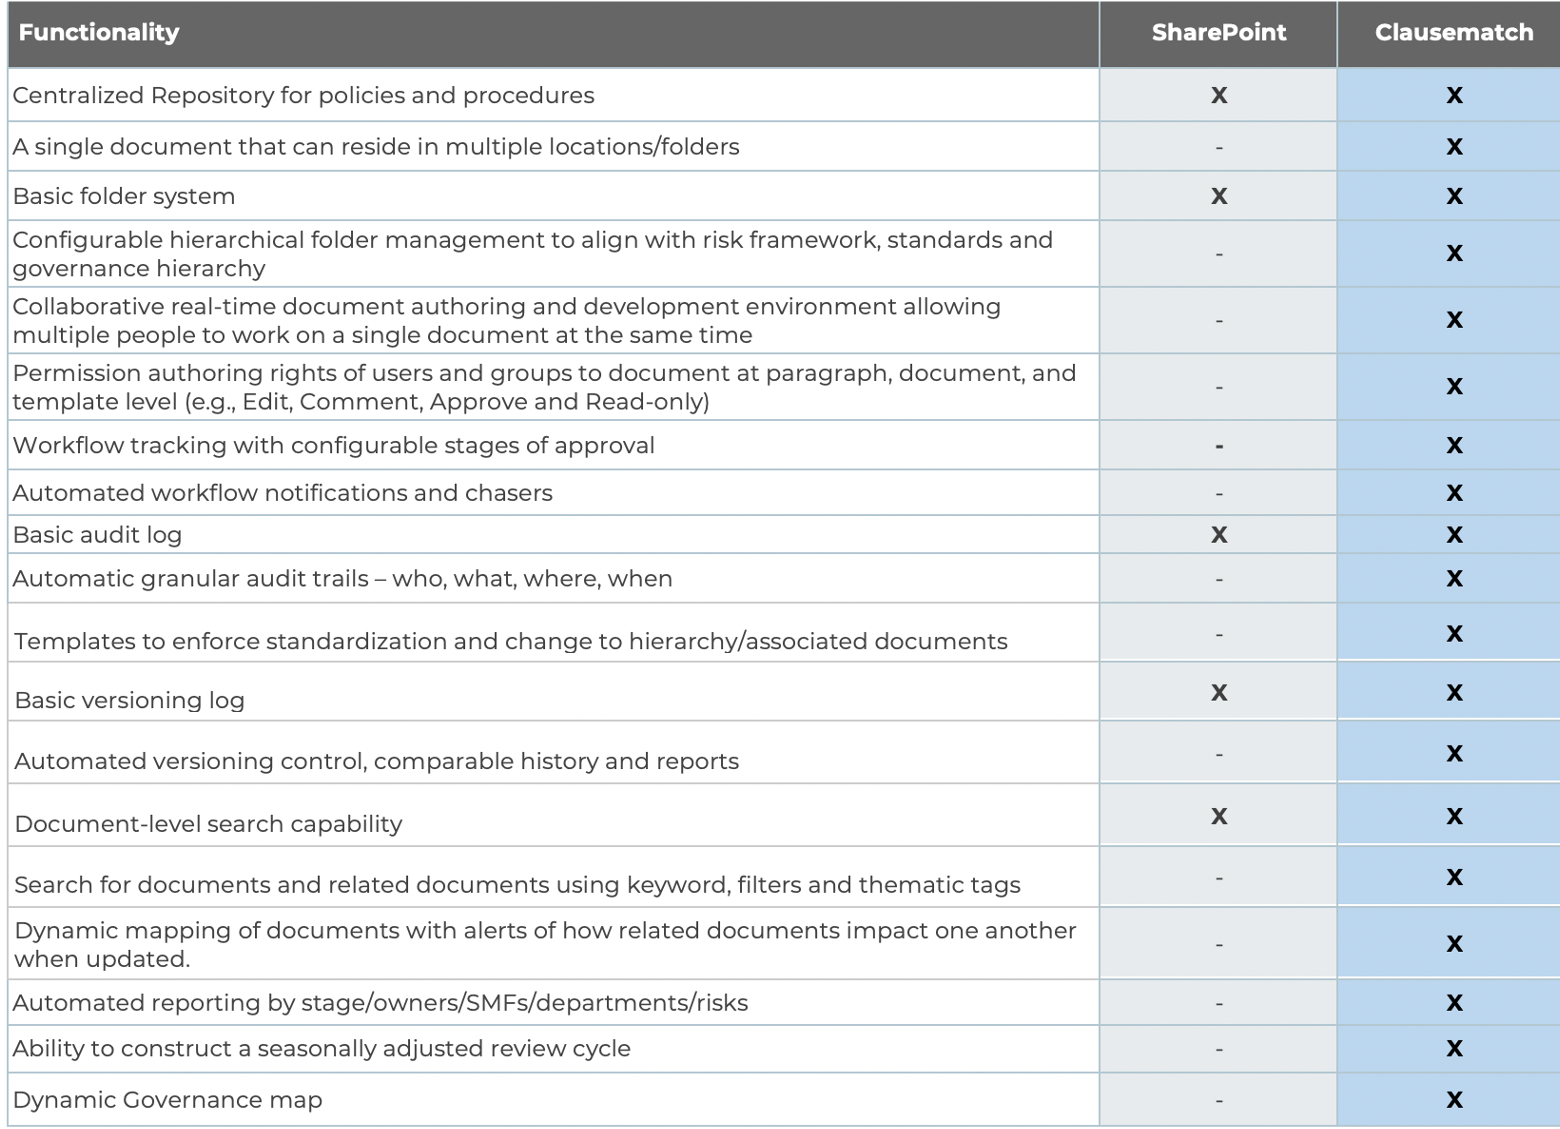 Table showing the functionality of Clausematch compared to Sharepoint